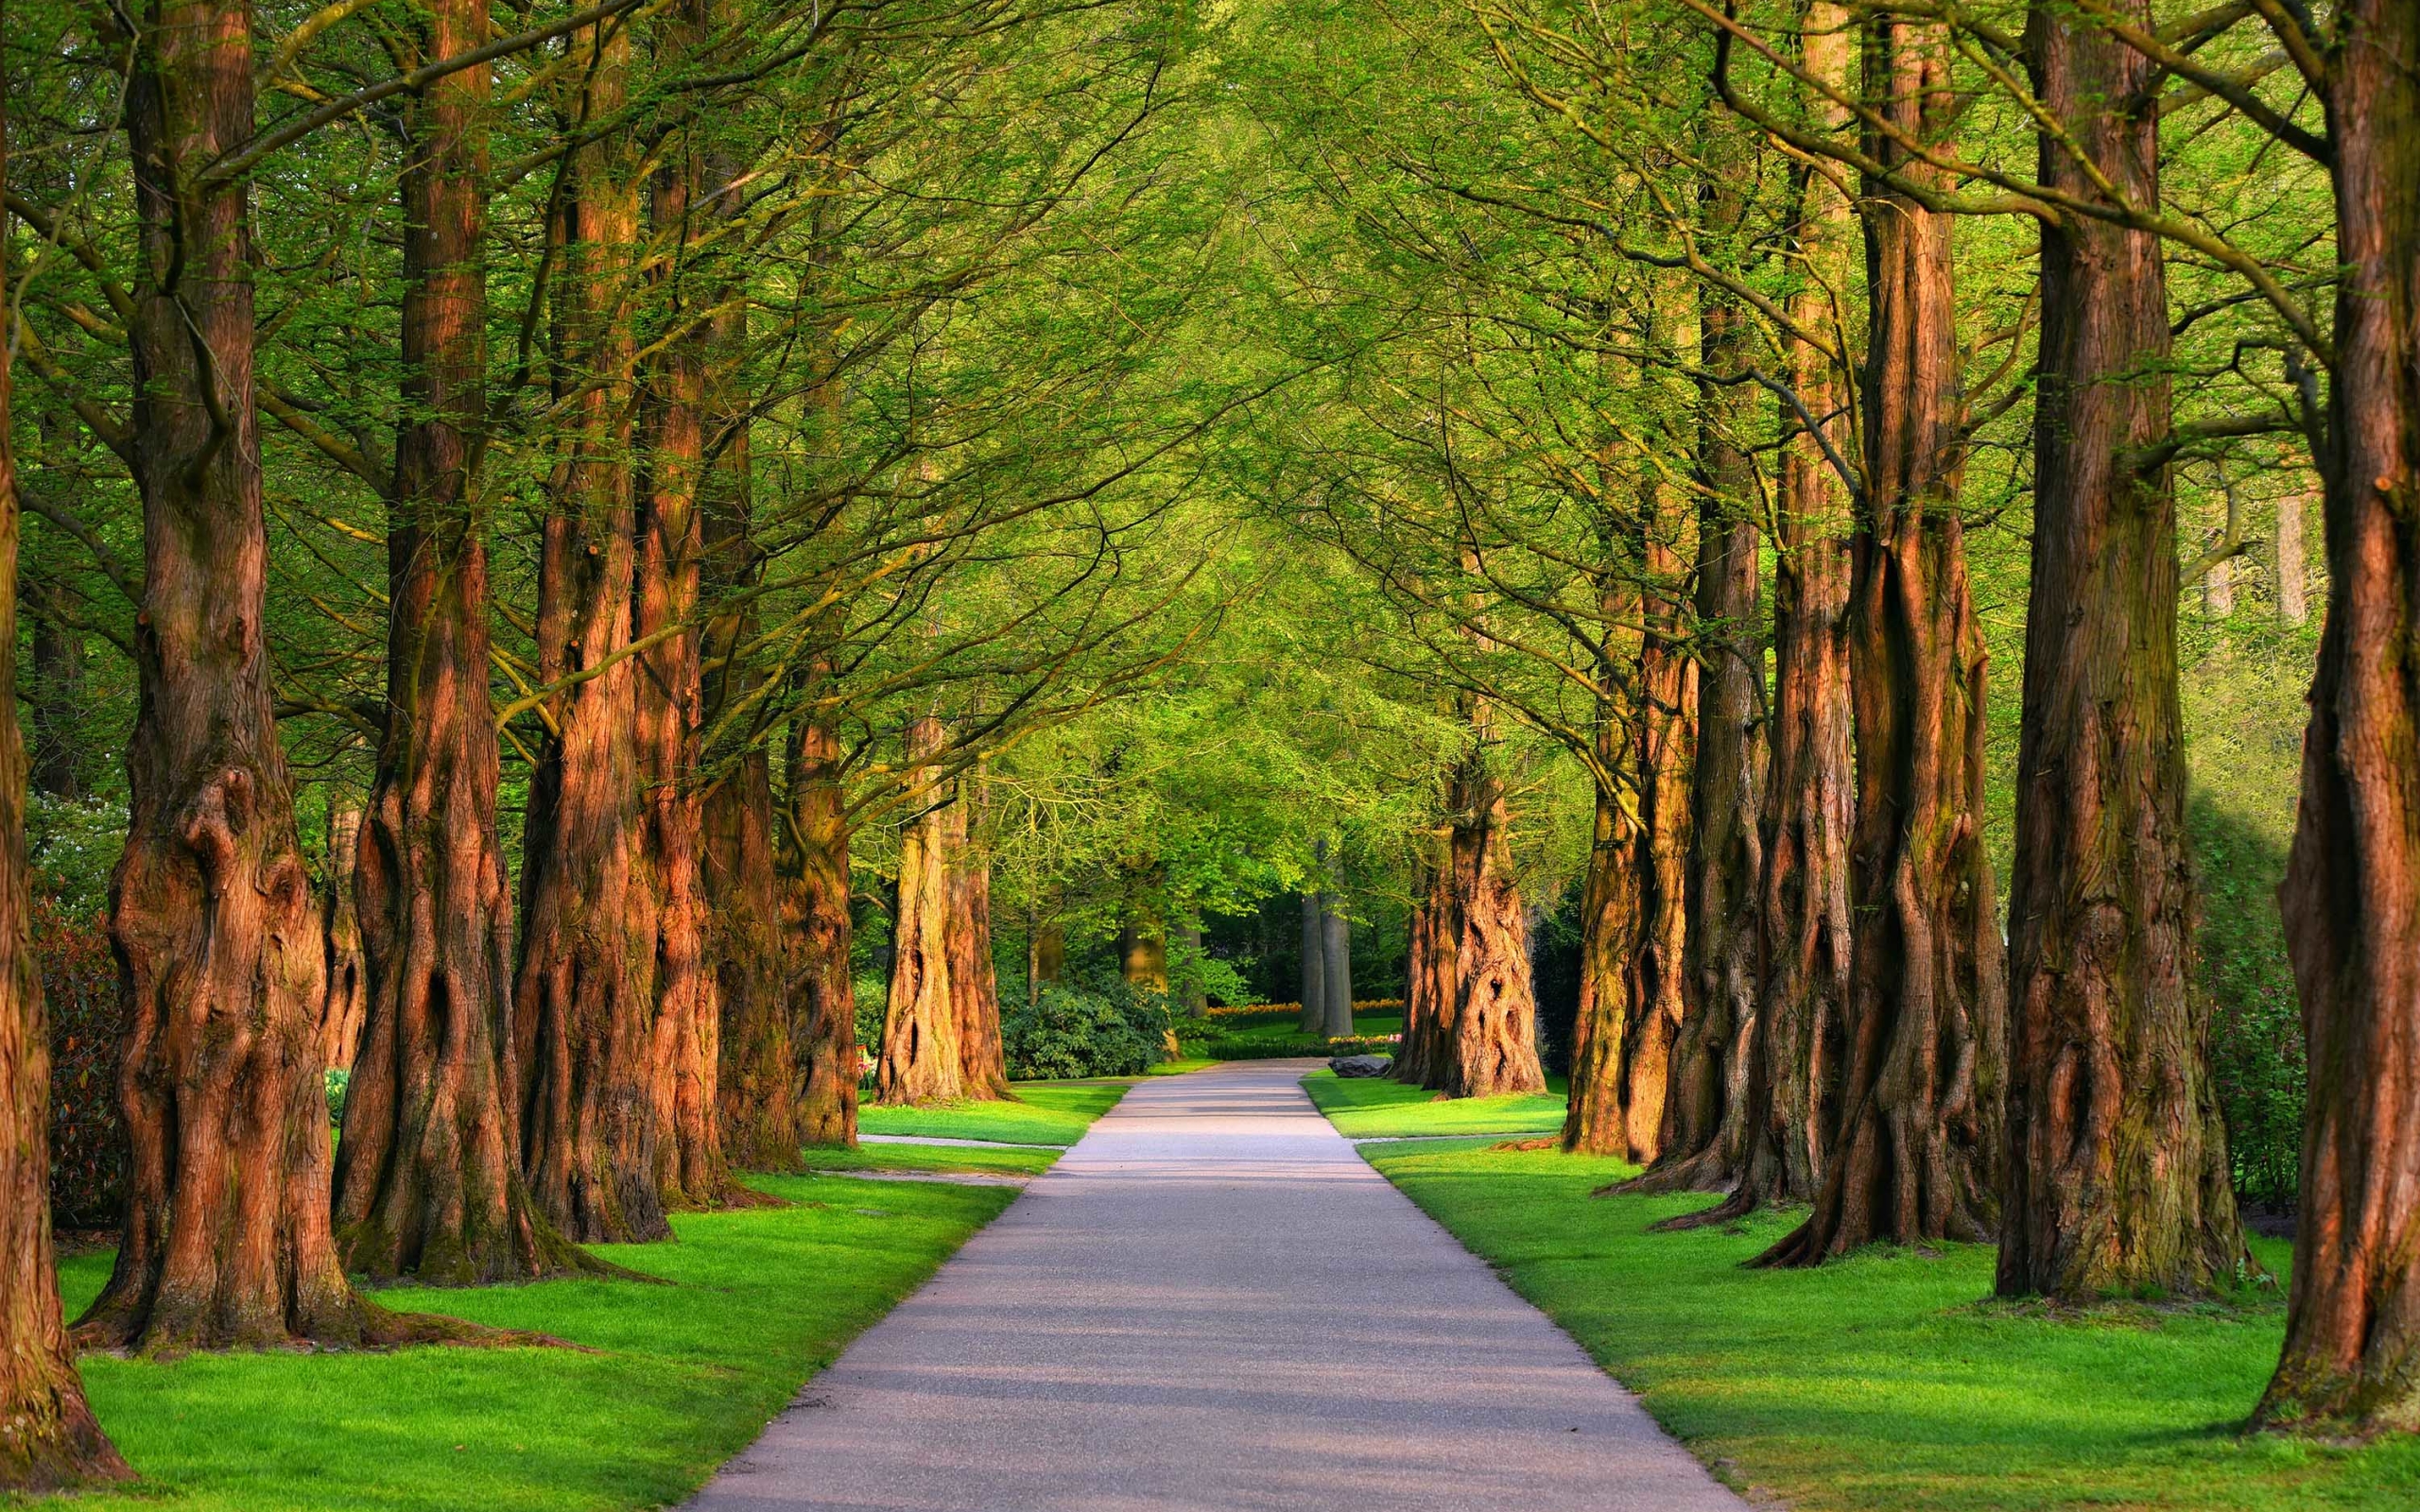 Wallpaper Of Park, Path, Tree Background & Hd Image - Tree Background Images Hd - HD Wallpaper 